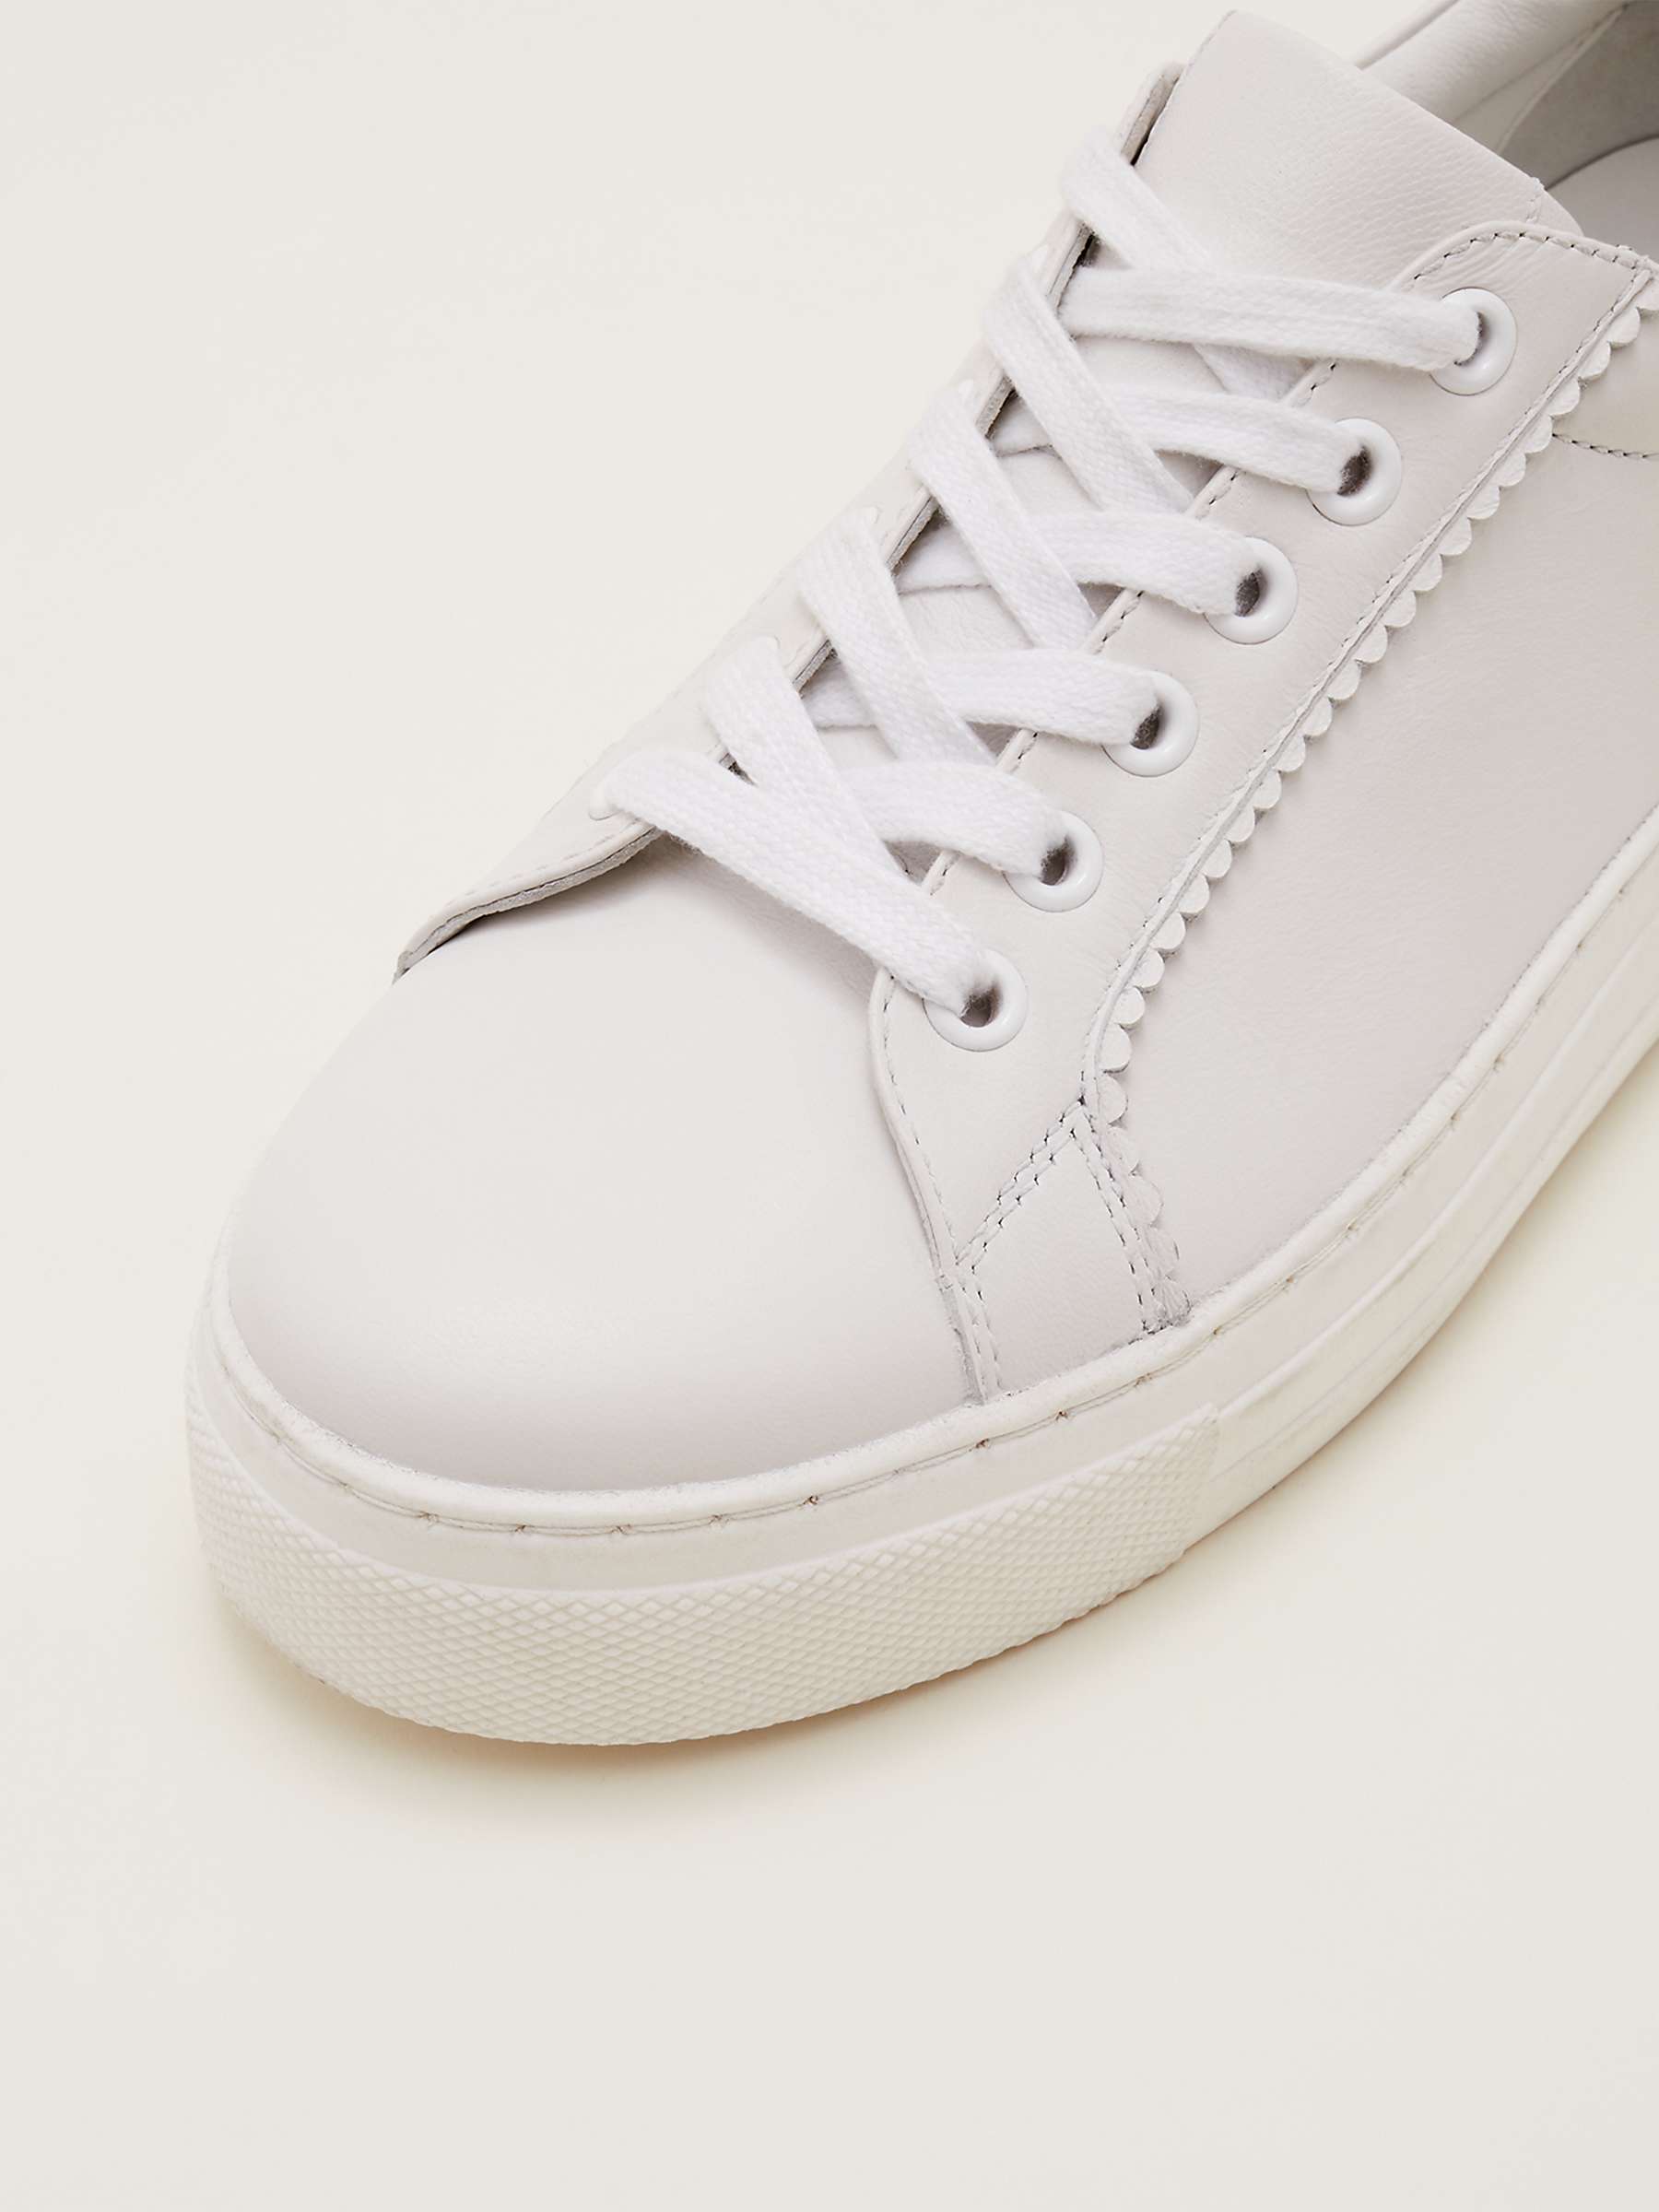 Buy Phase Eight Leather Everyday Trainers Online at johnlewis.com